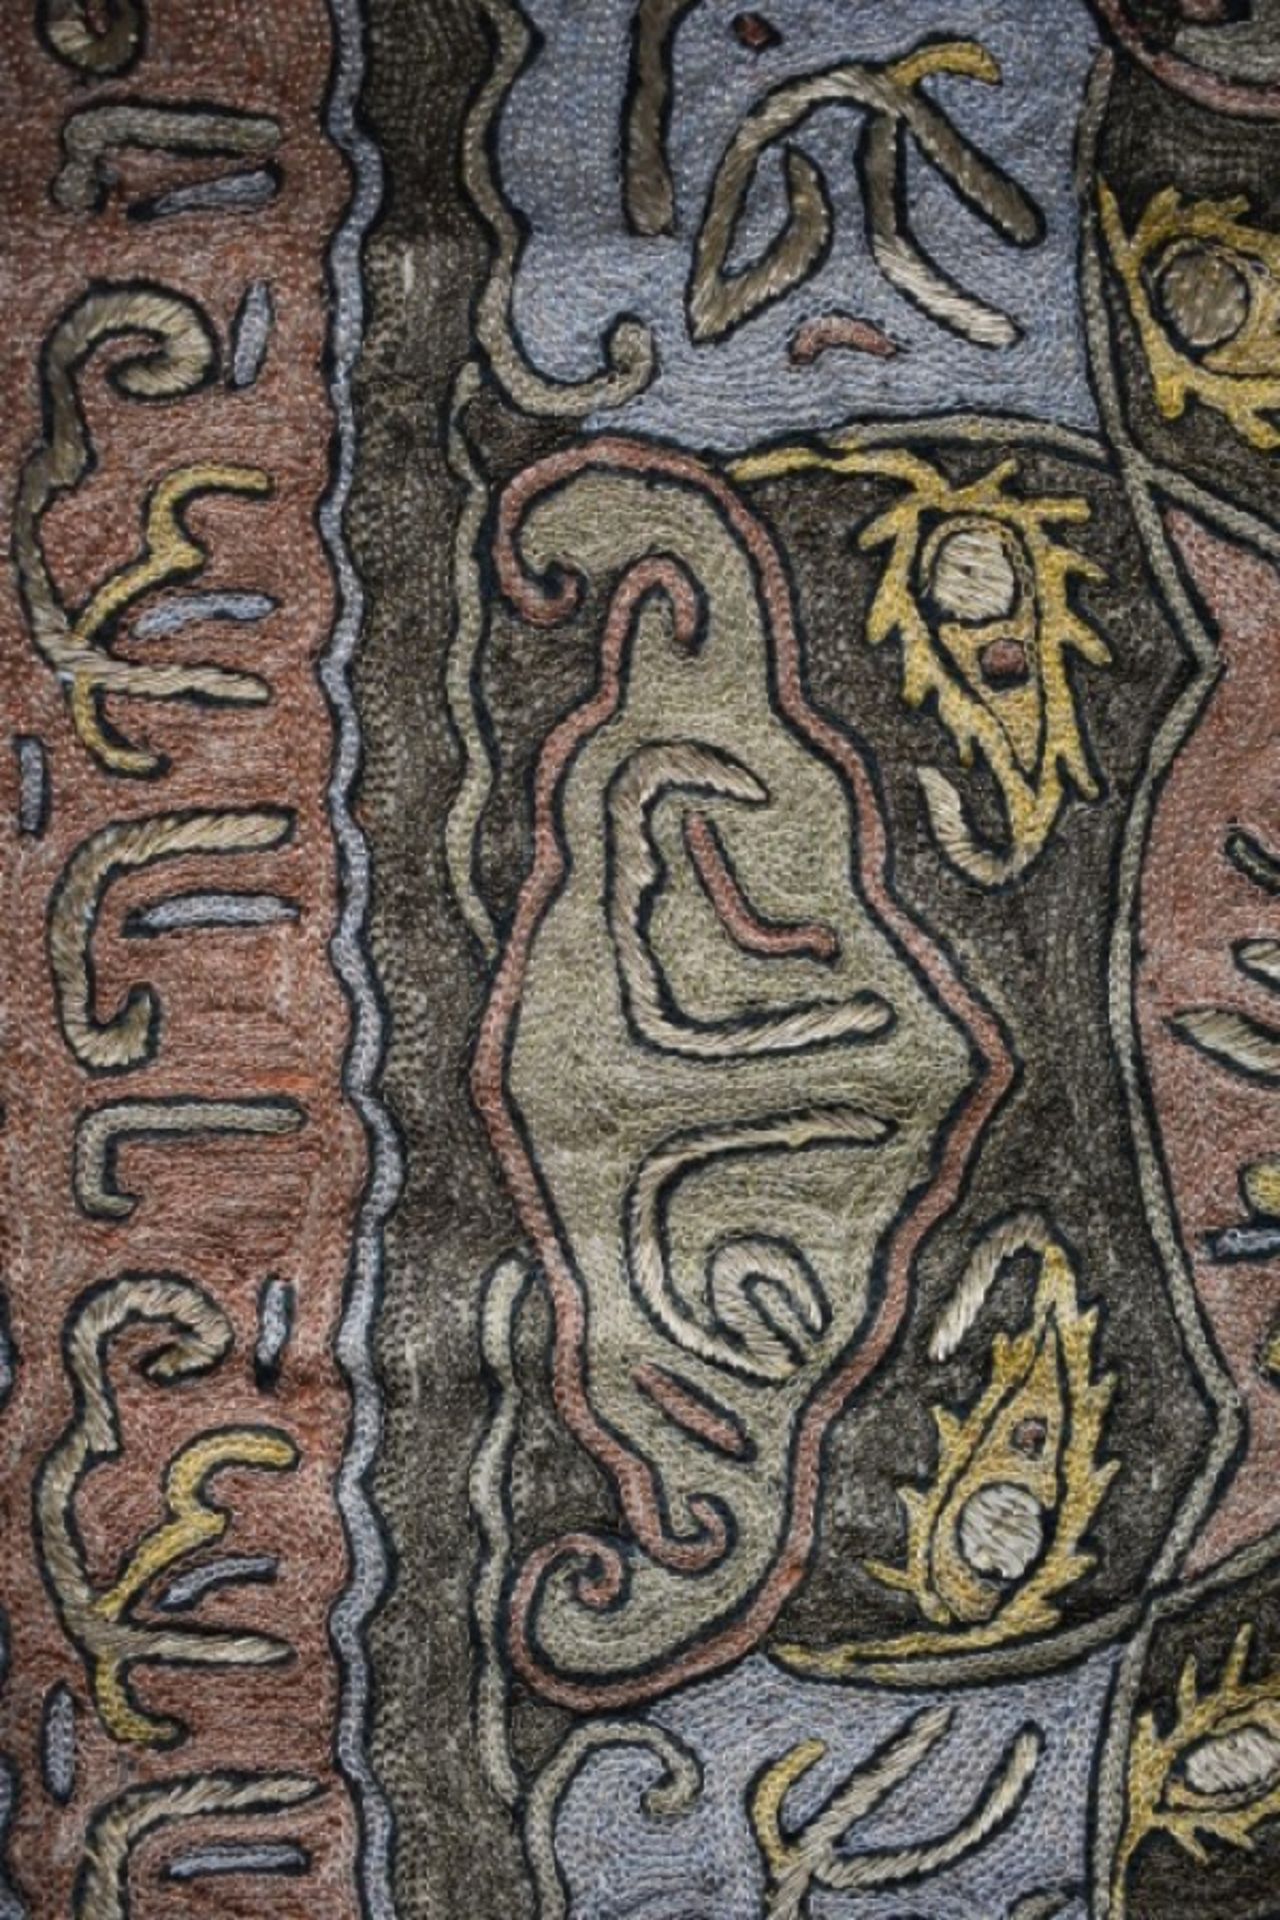 Ottoman Embroidery - Image 5 of 6